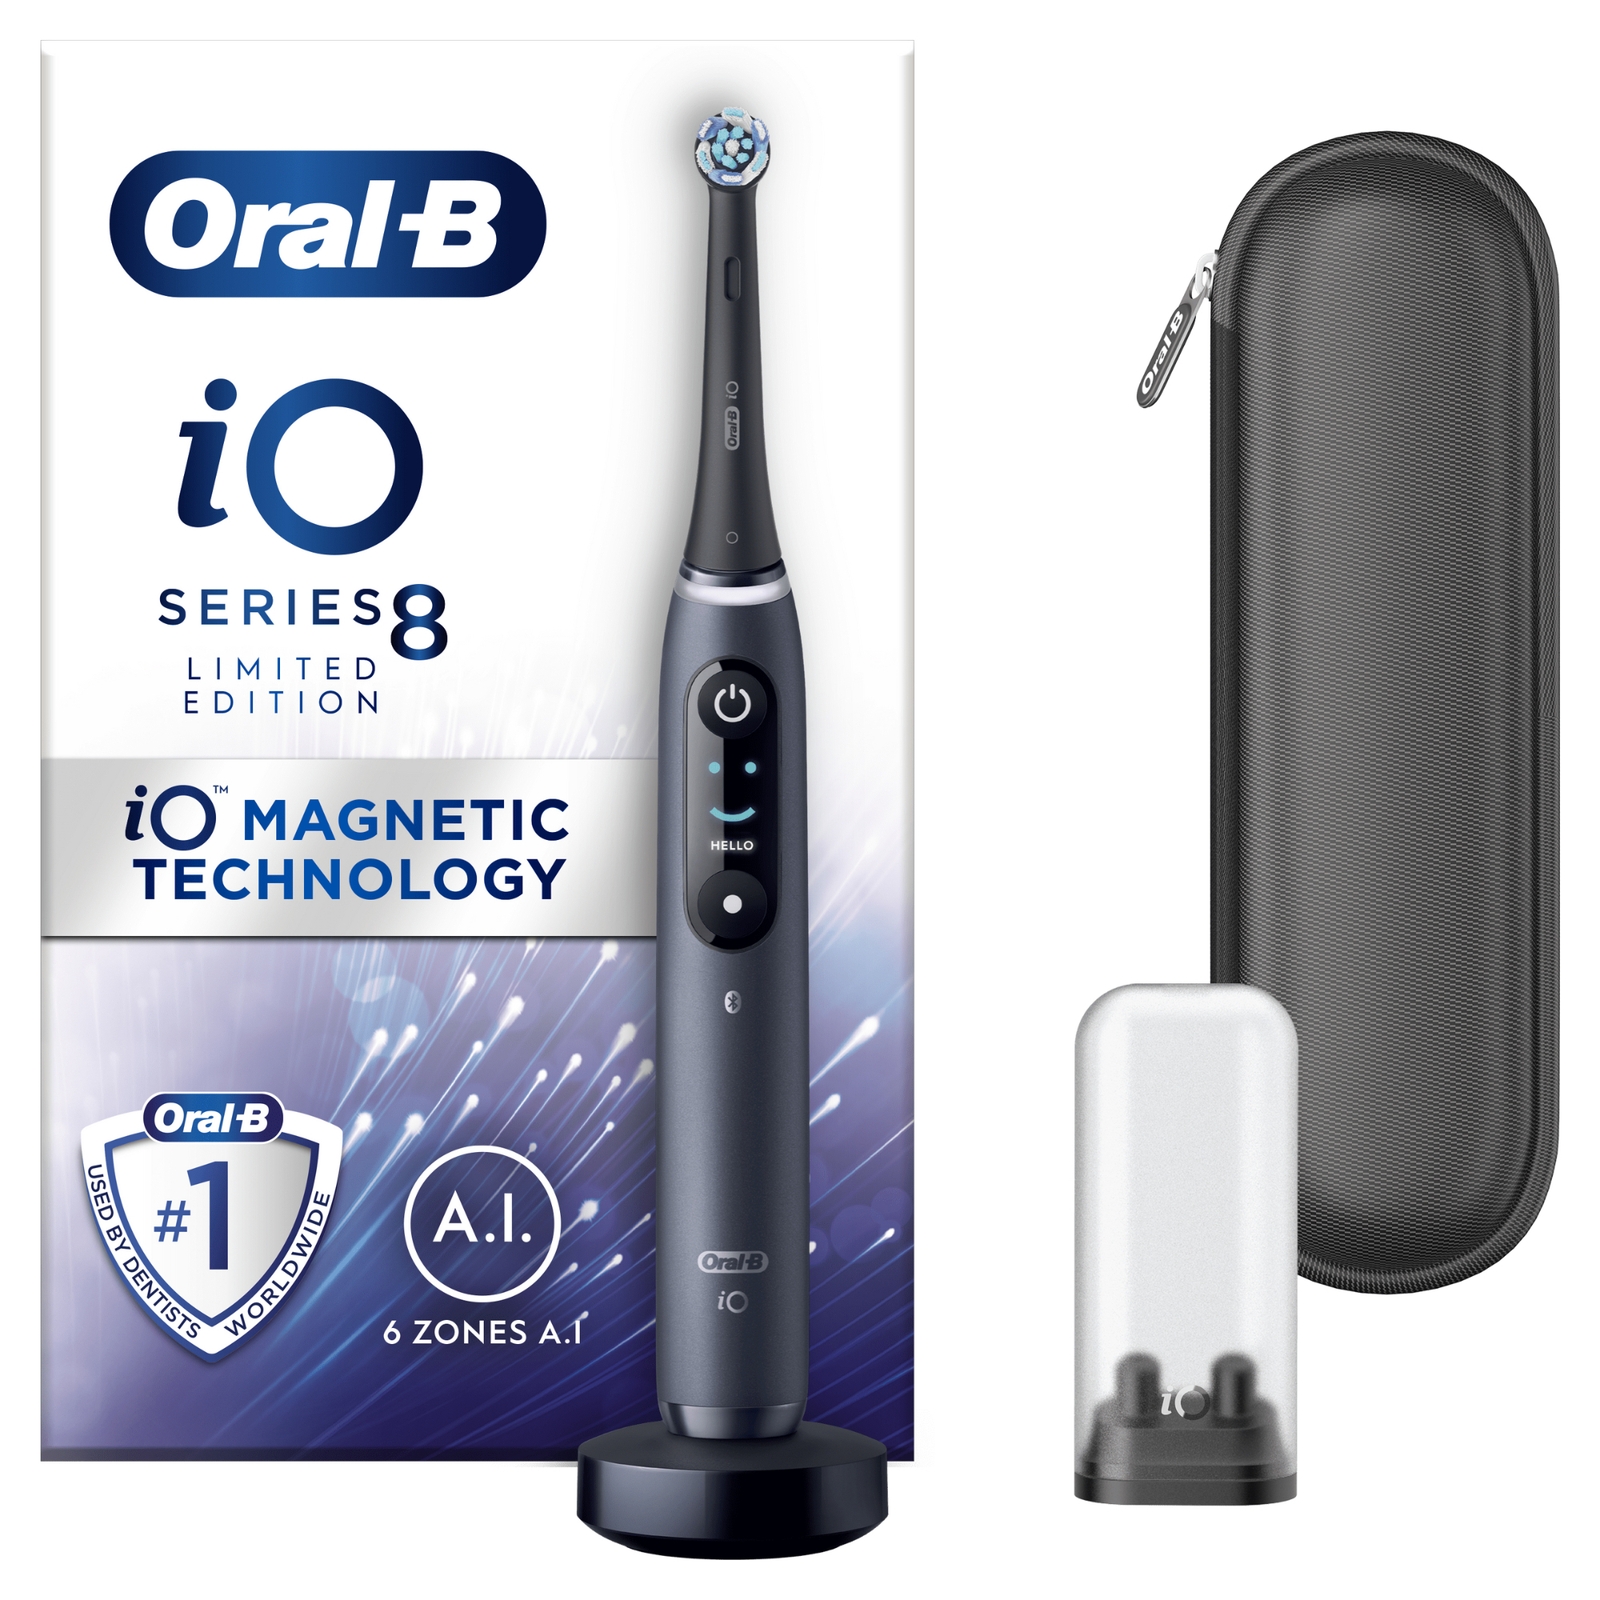 Oral B iO8 Black Electric Toothbrush with Zipper Case - Toothbrush